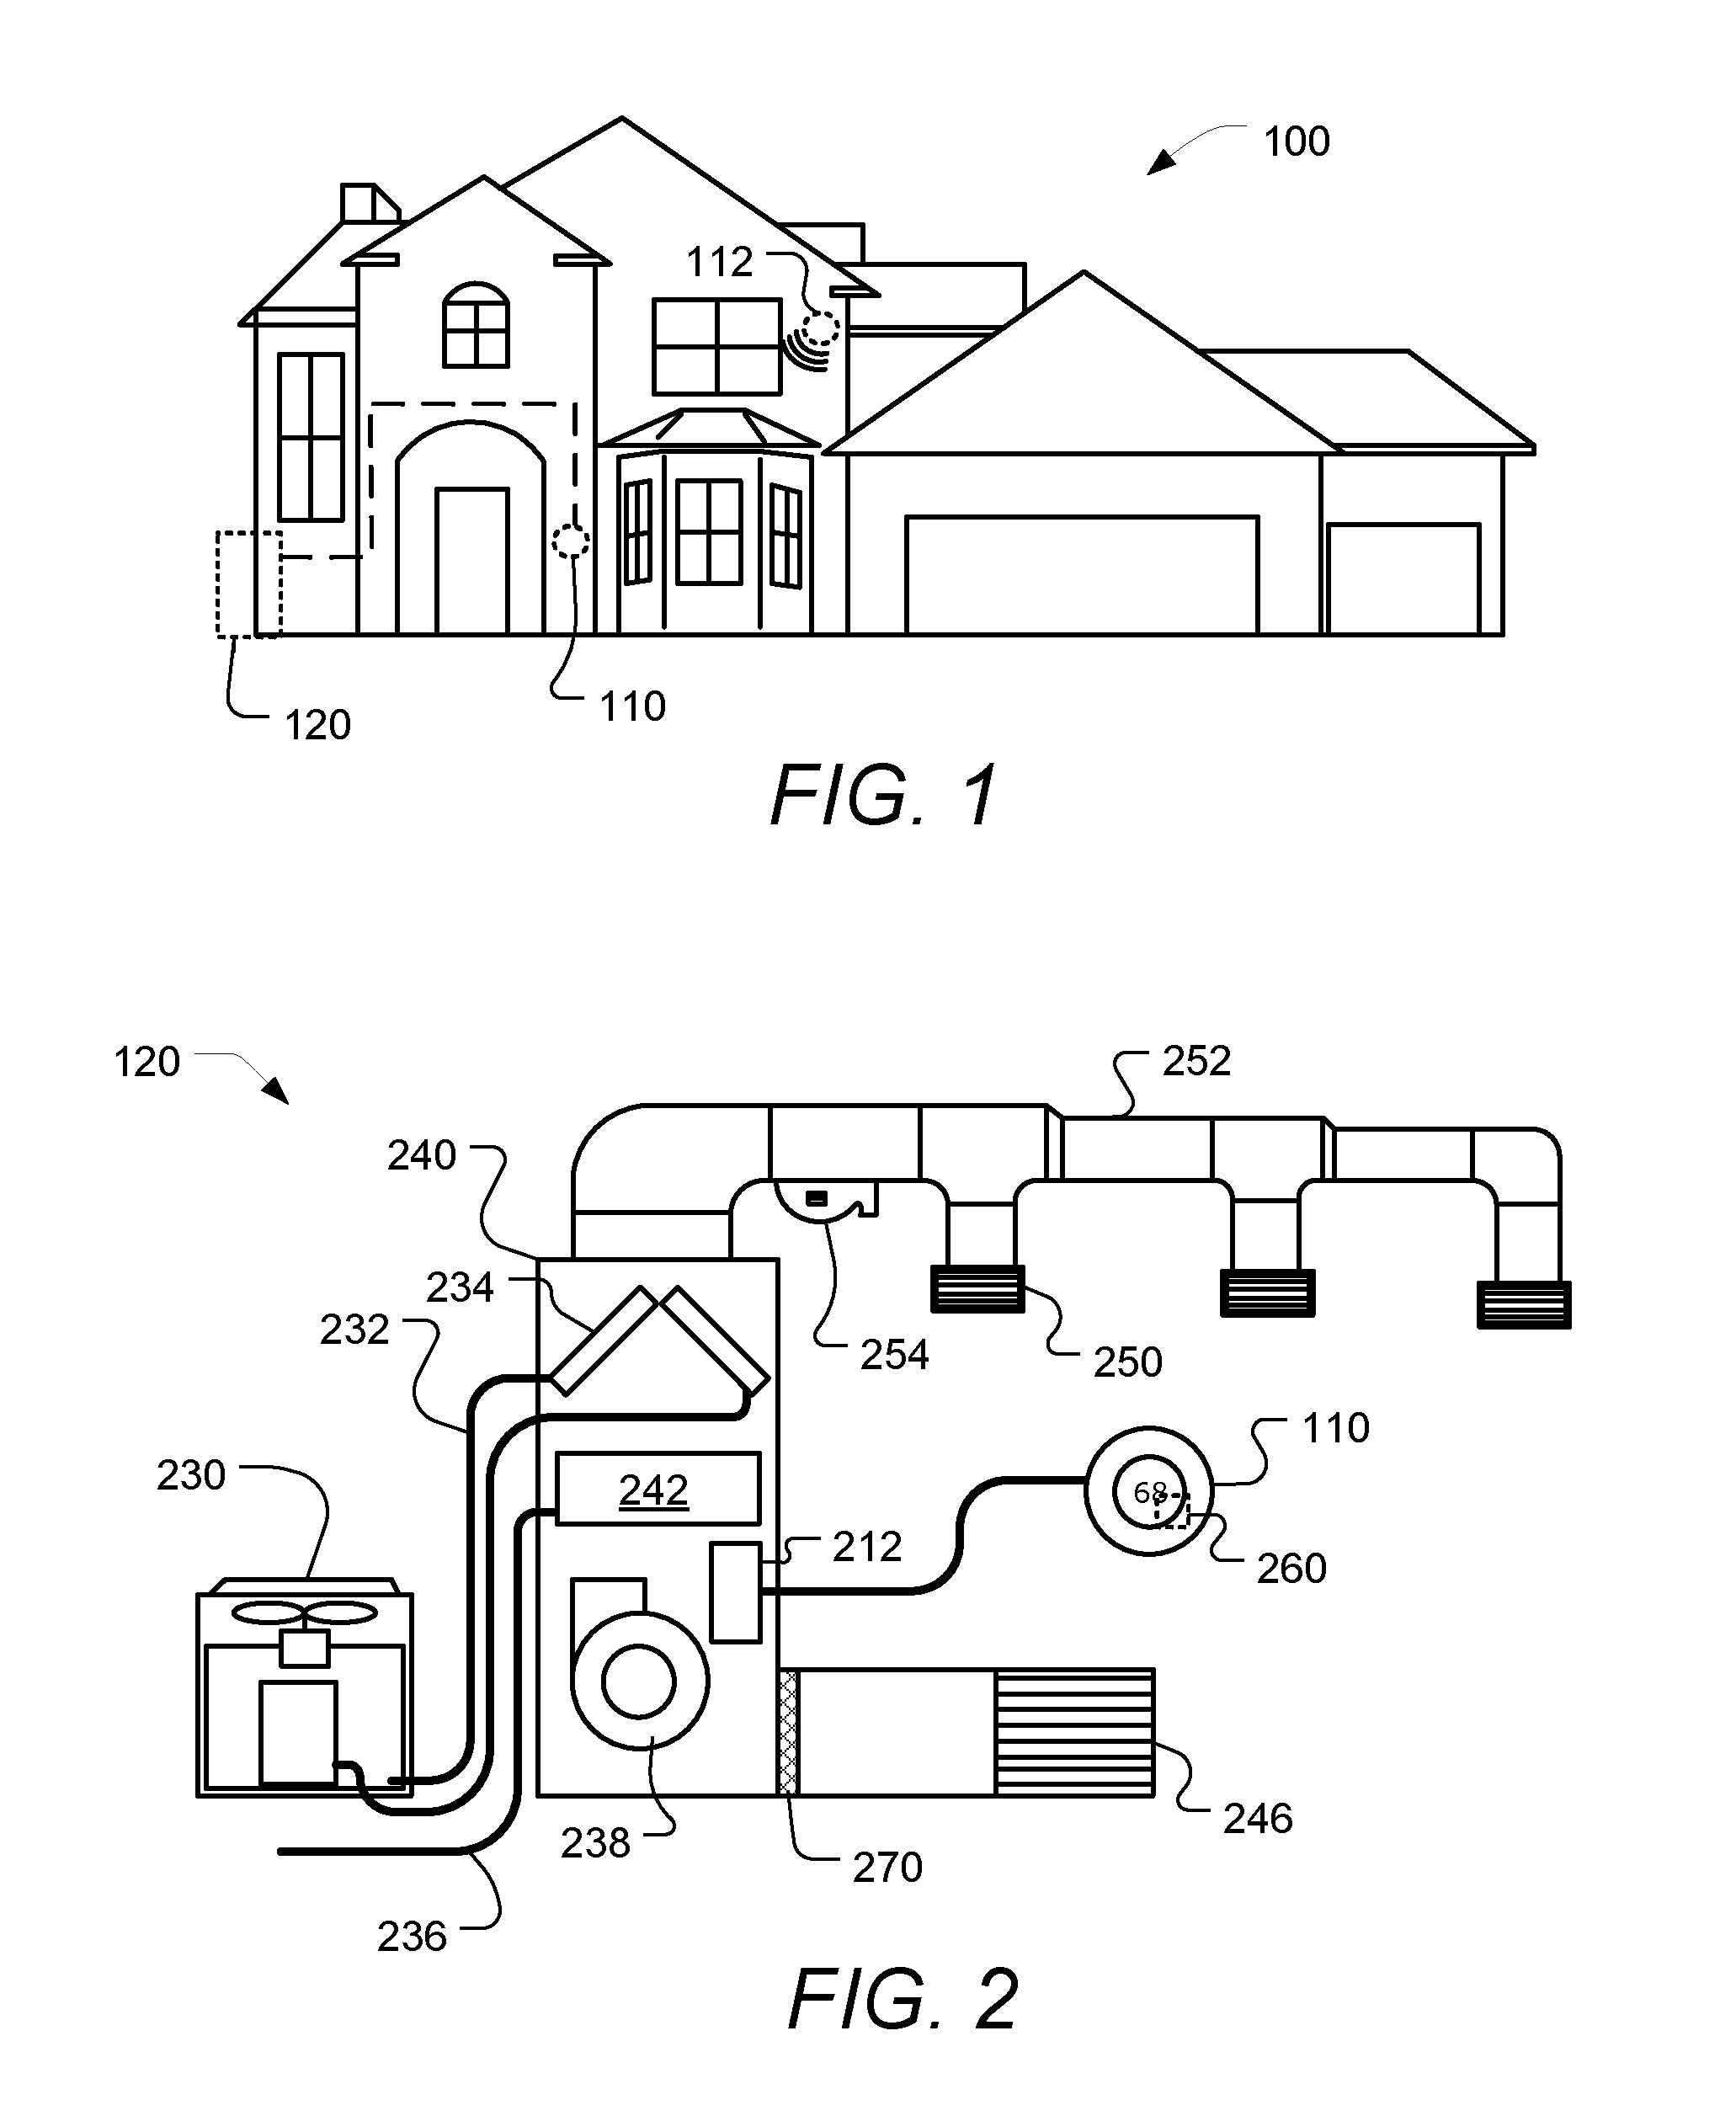 Systems and Methods for Energy-Efficient Control of an Energy-Consuming System